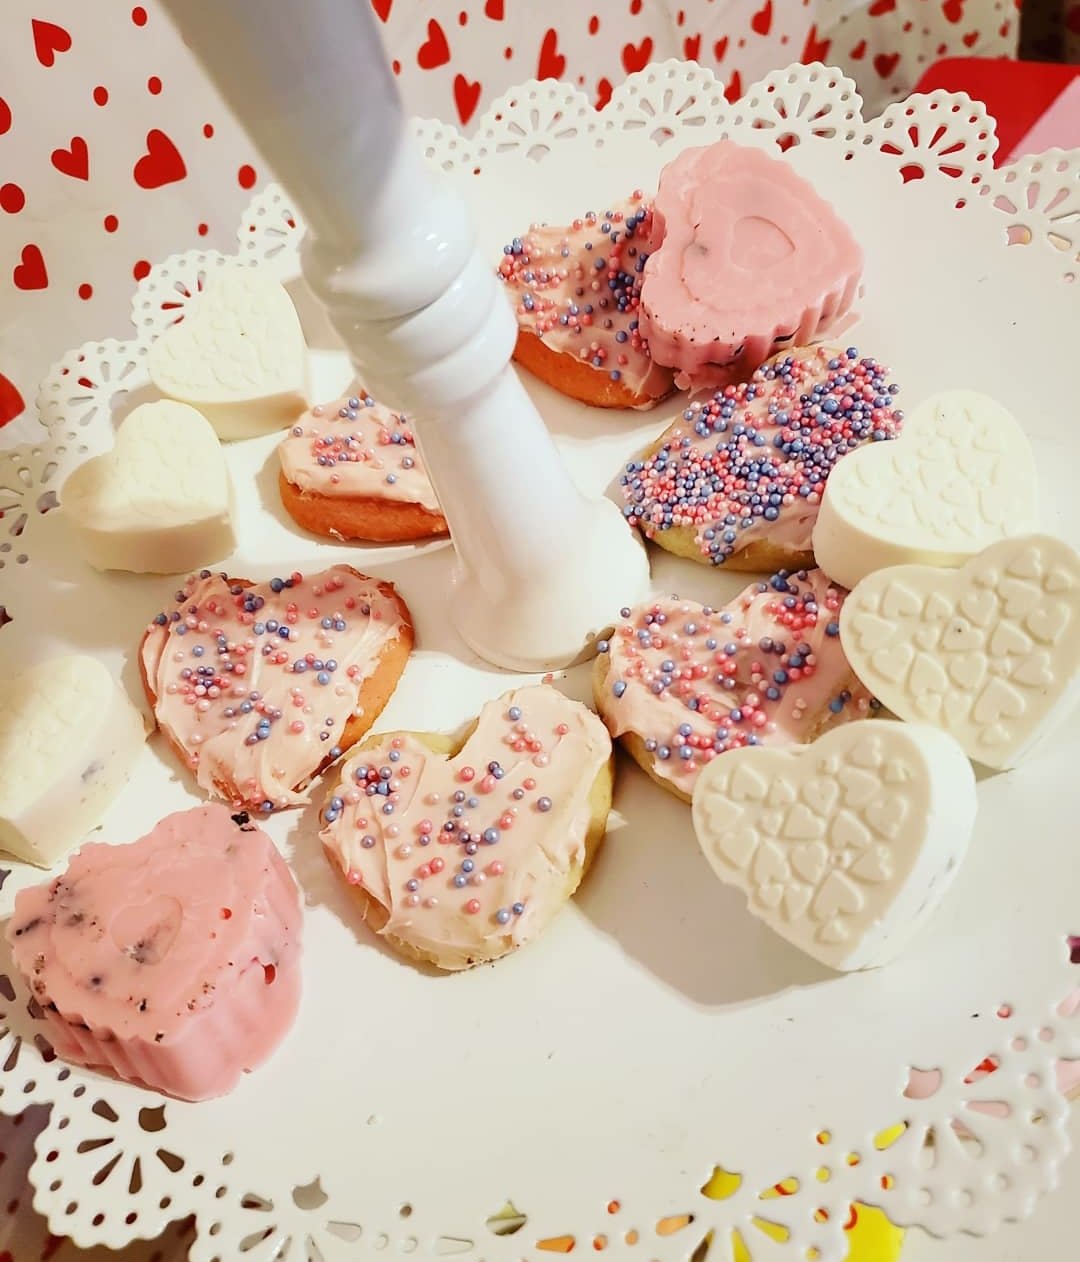 Chocolate Heart Candies and Heart Sugar Cookies with sprinkles on cake stand for Valentine's Day Party